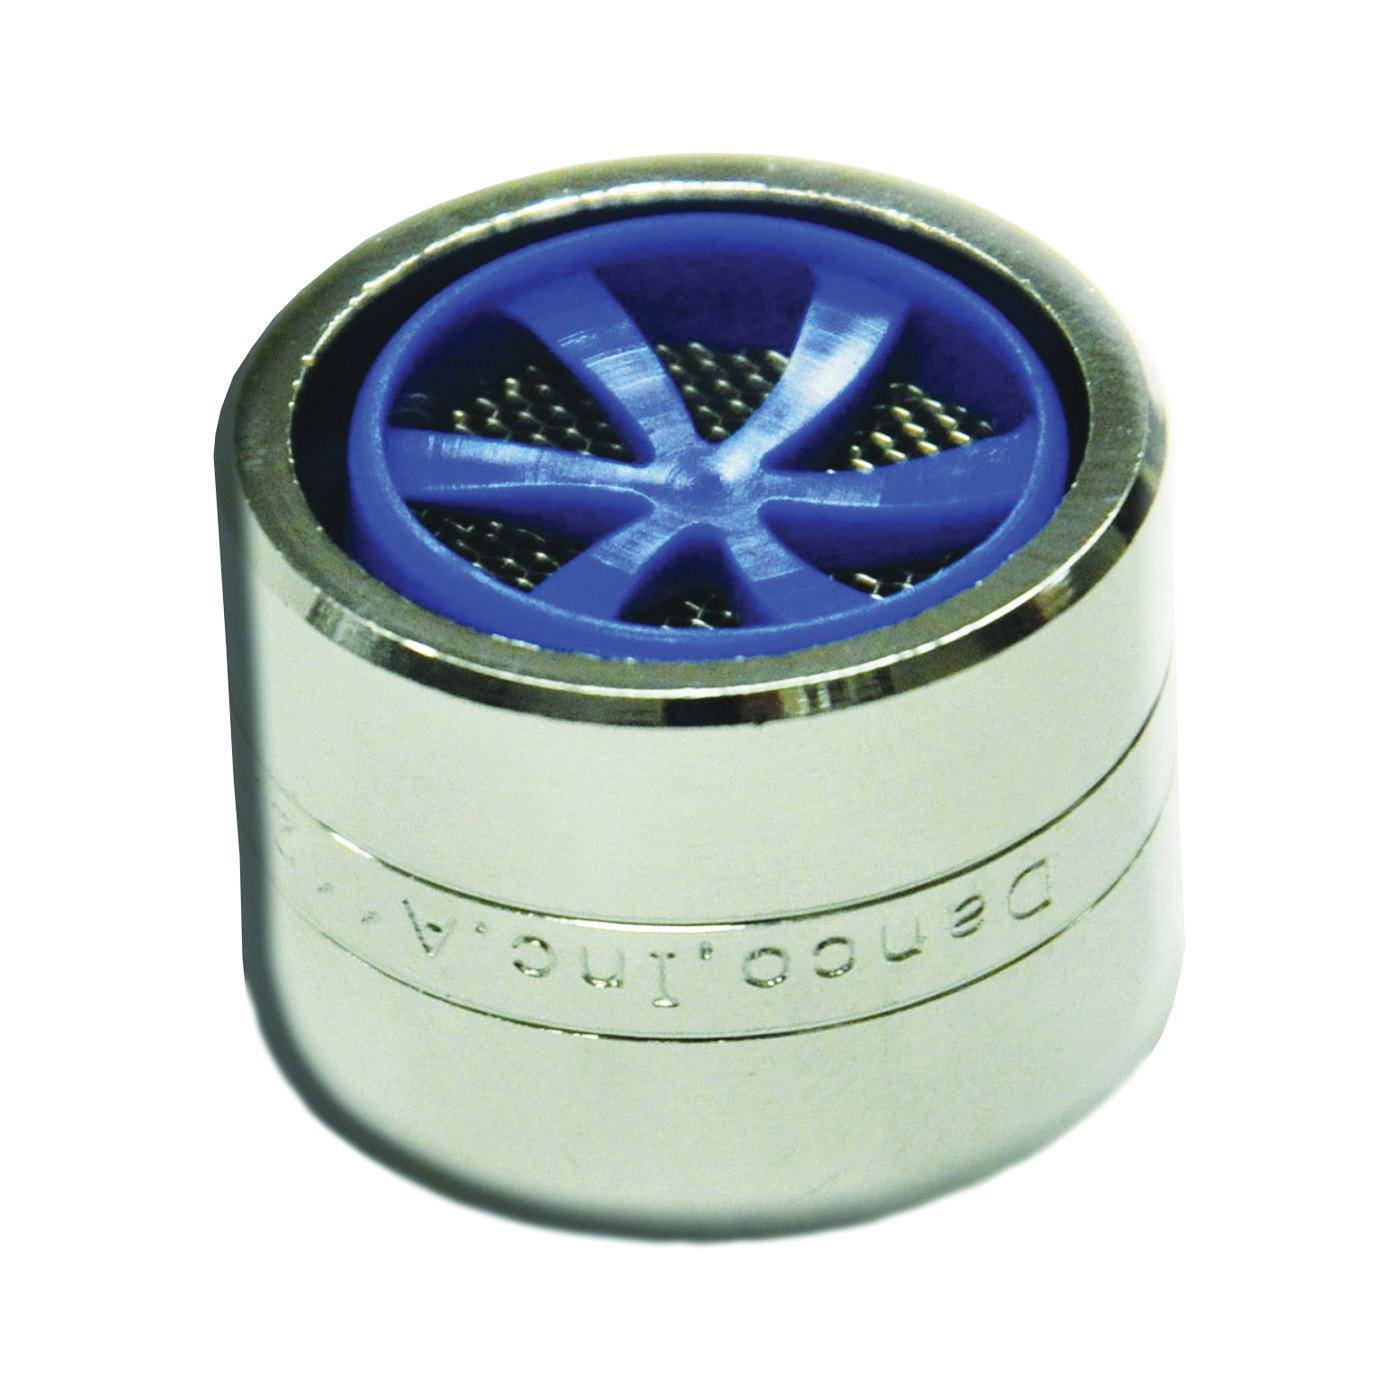 10481 Faucet Aerator, 55/64-27 Female, Brass, Chrome Plated, 1.5 gpm